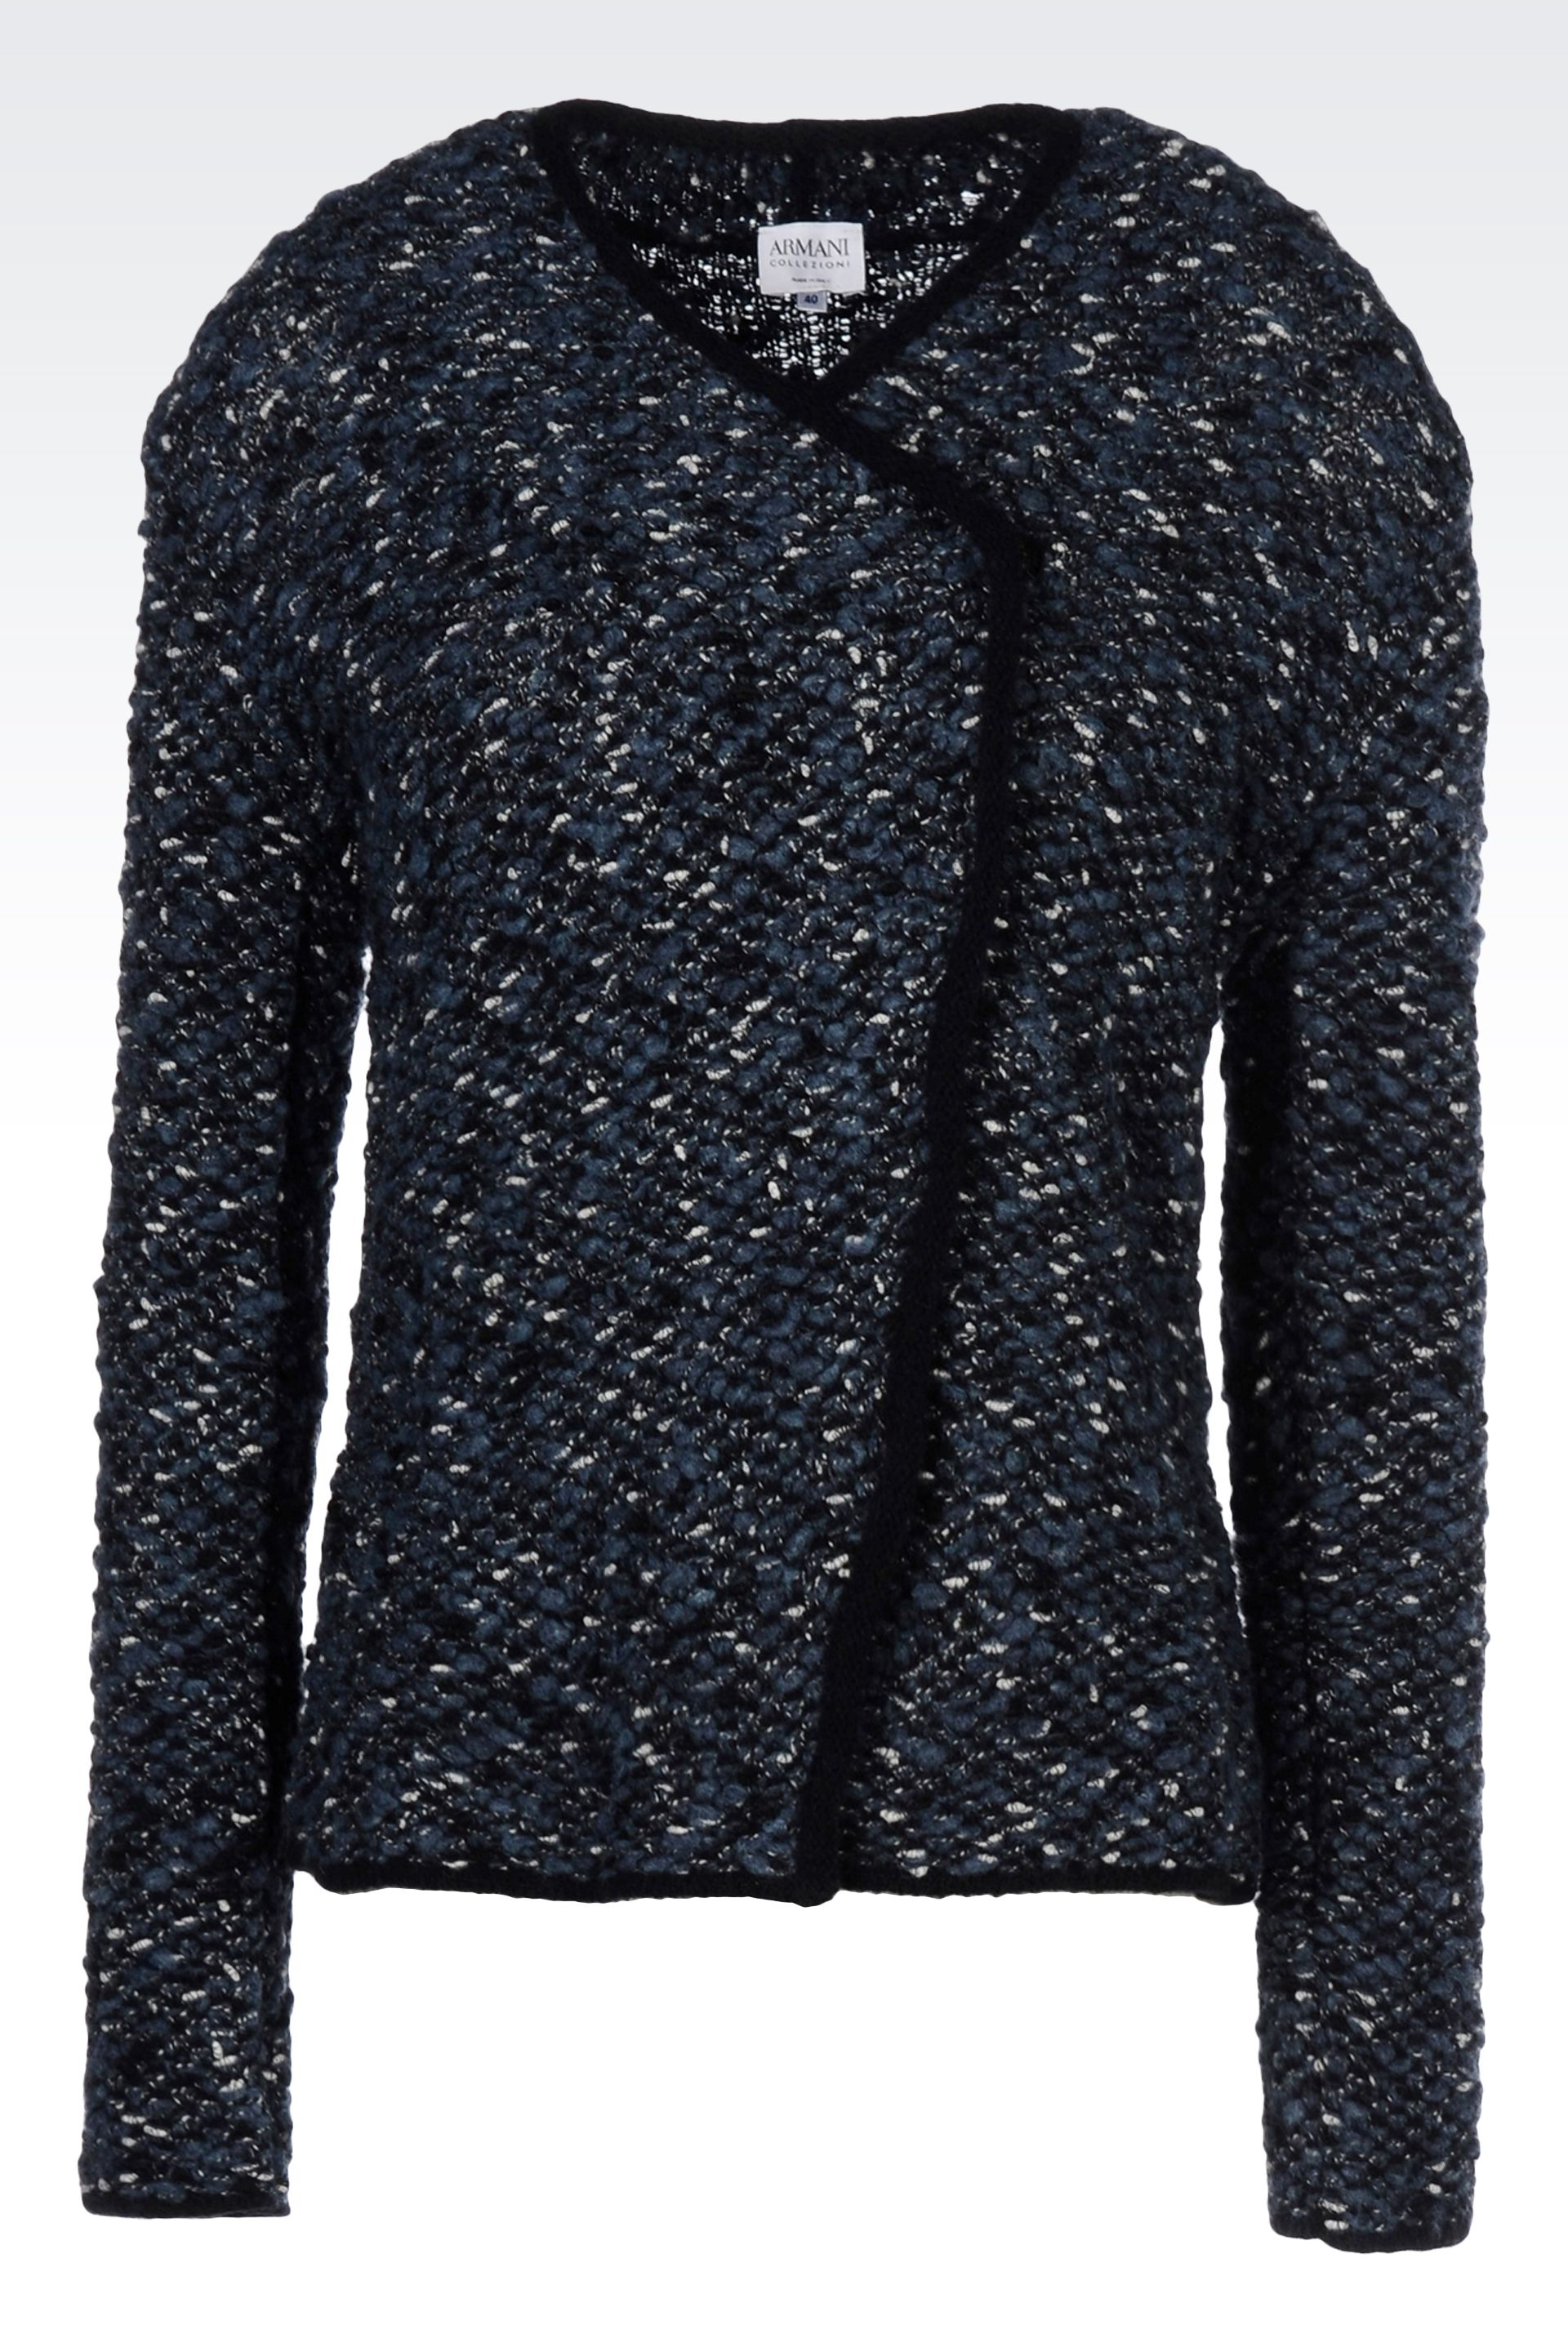 Lyst - Armani Piped Seam Tweed Jacket in Gray